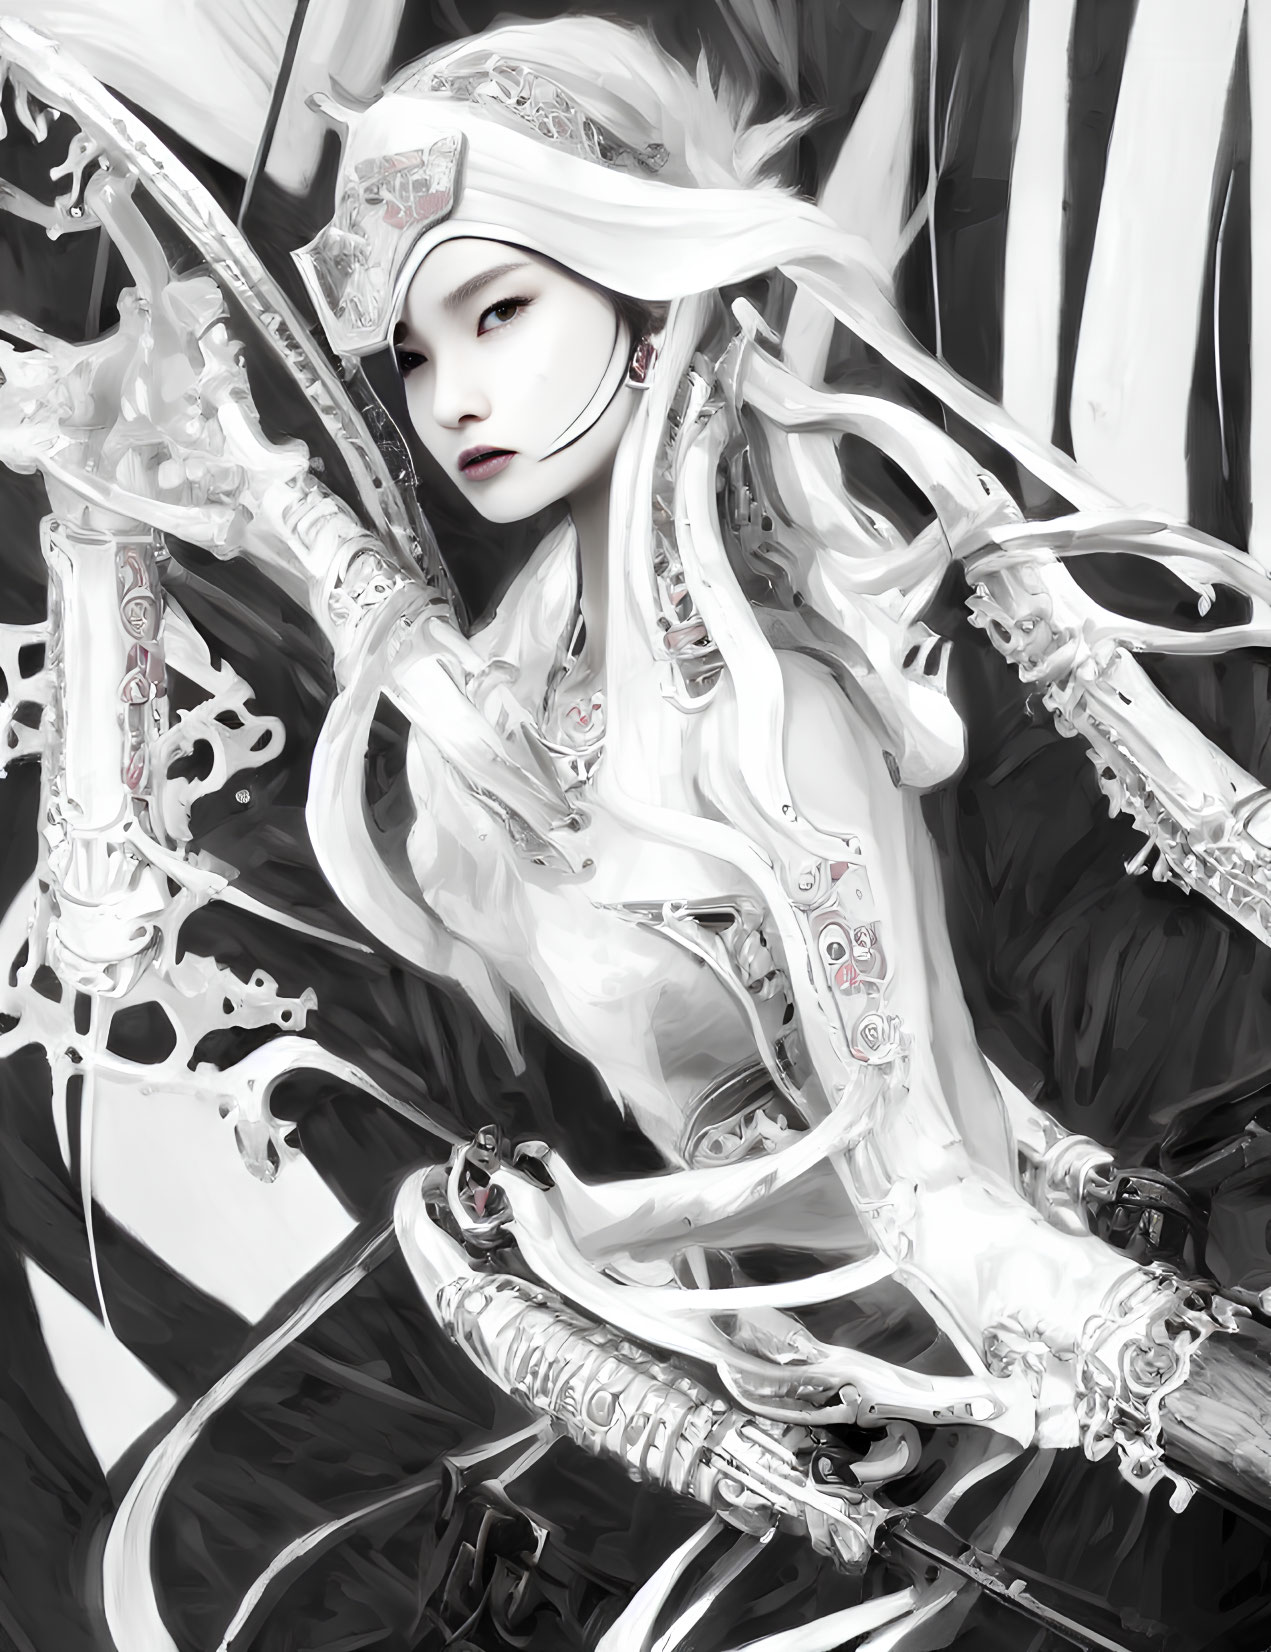 Monochrome illustration of powerful fantasy warrior woman in intricate armor